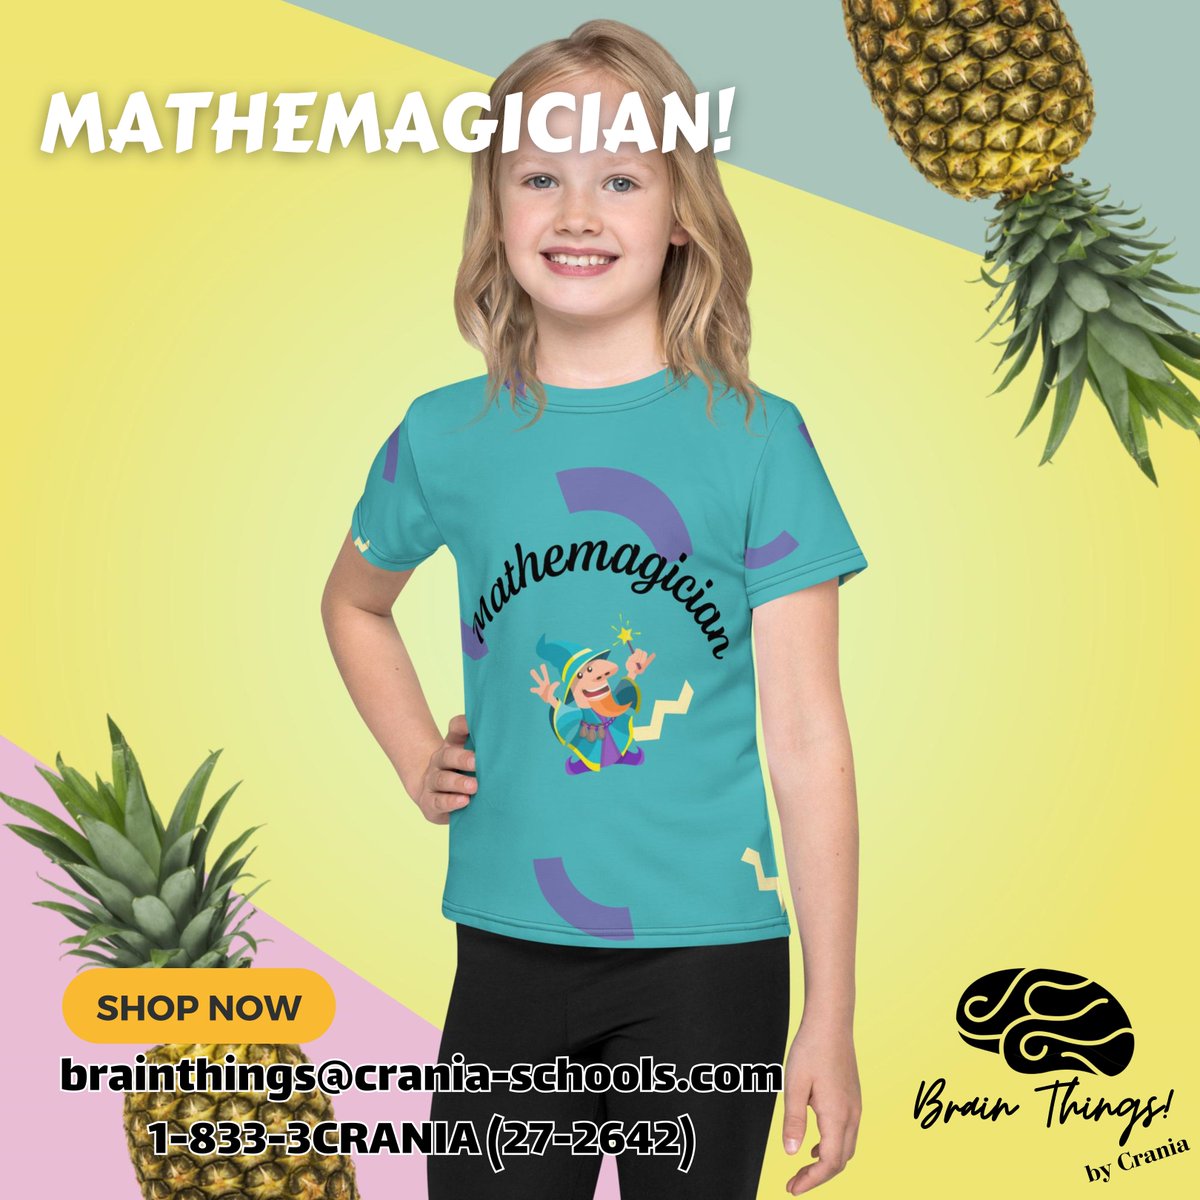 It's day 9 of our 12 days of Christmas celebration - today we've got a special treat for the kids! A Mathemagician t-shirt! 🤩 This is sure to be a hit with your little one that loves Math! 🤩
brainthings.crania-schools.com/?utm_source=tw…
#12DaysofGifts #mathnerd #nerdygifts #festivegifts #mathgifts